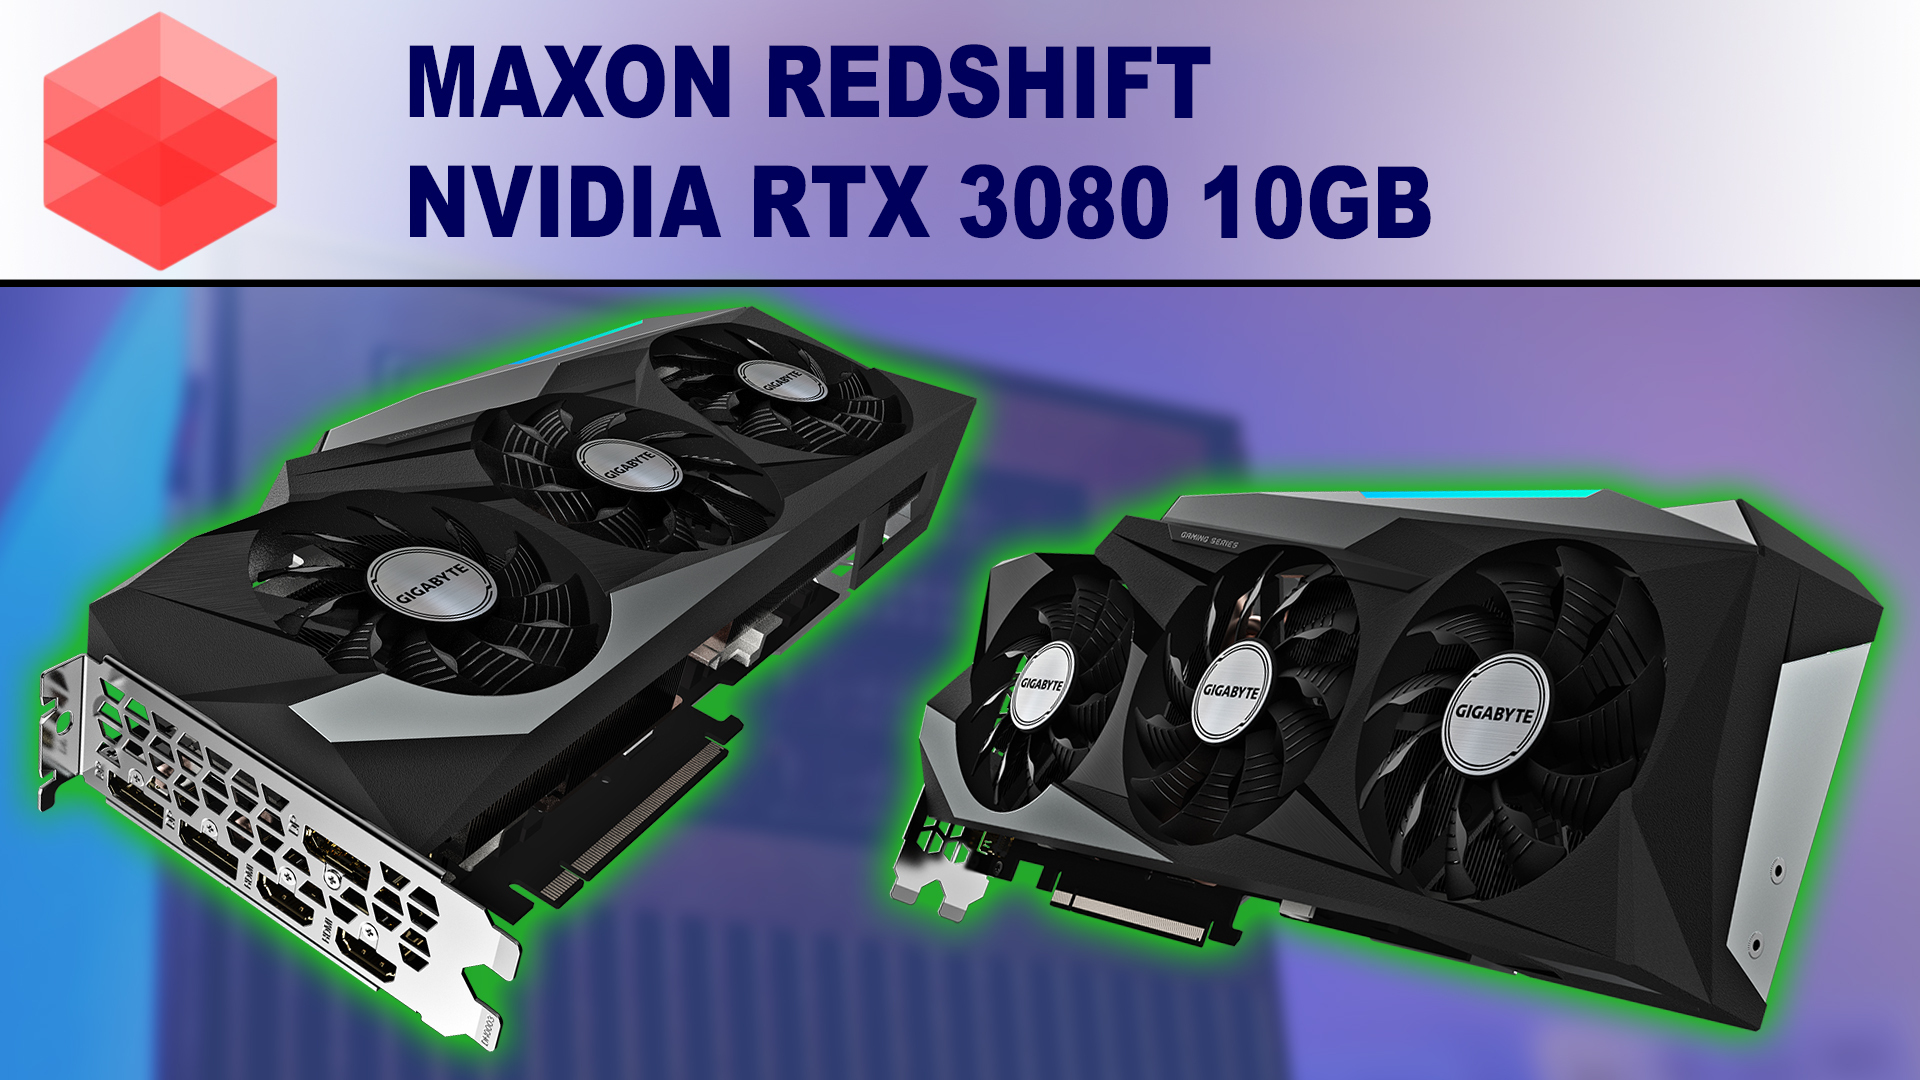 Redshift 3.0 GPU Rendering Performance Review for NVIDIA GeForce RTX 3080 10GB